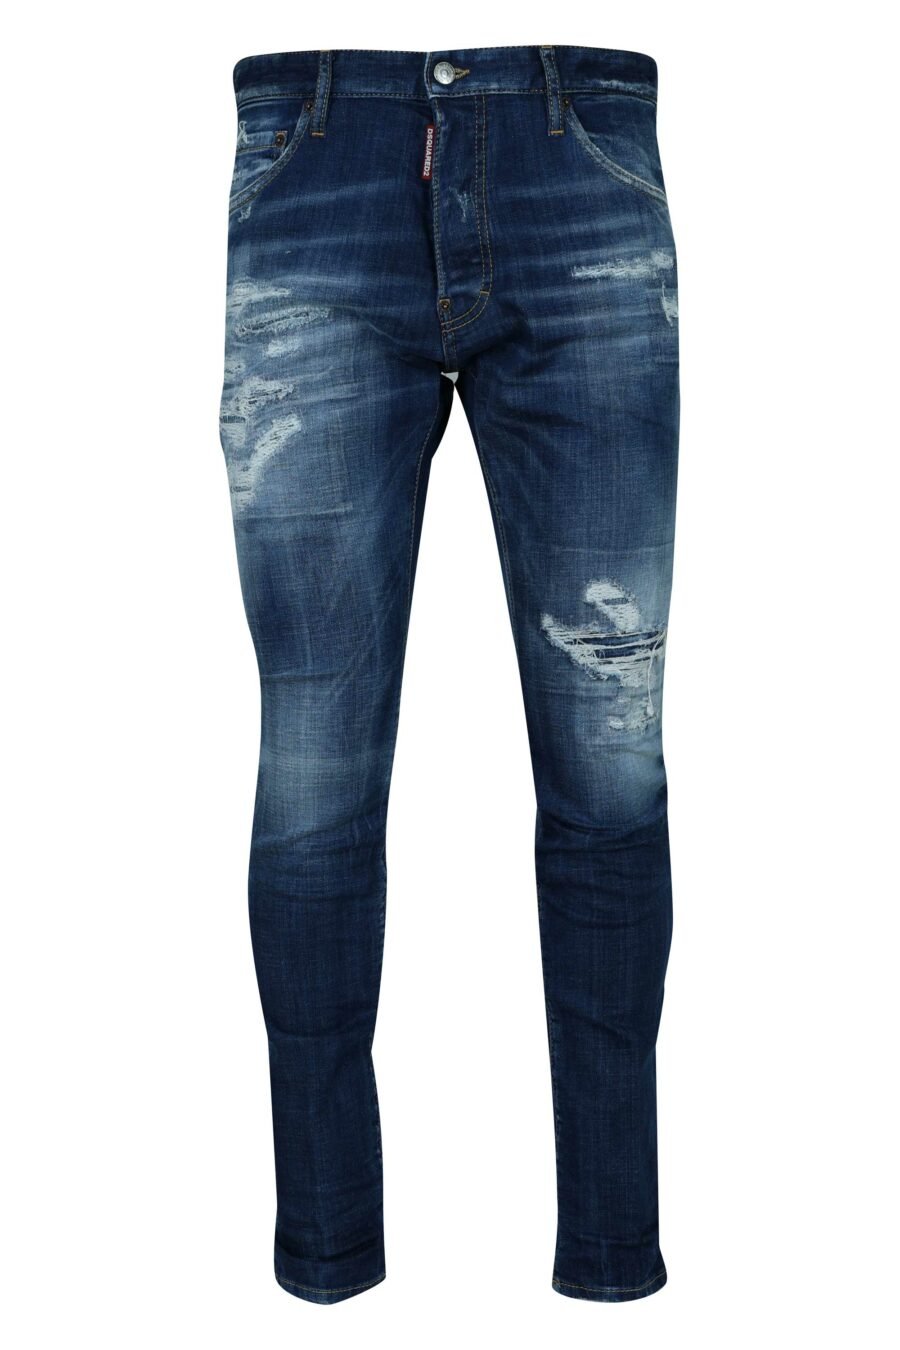 Dark blue "cool guy jean" worn and ripped jeans - 8054148473402